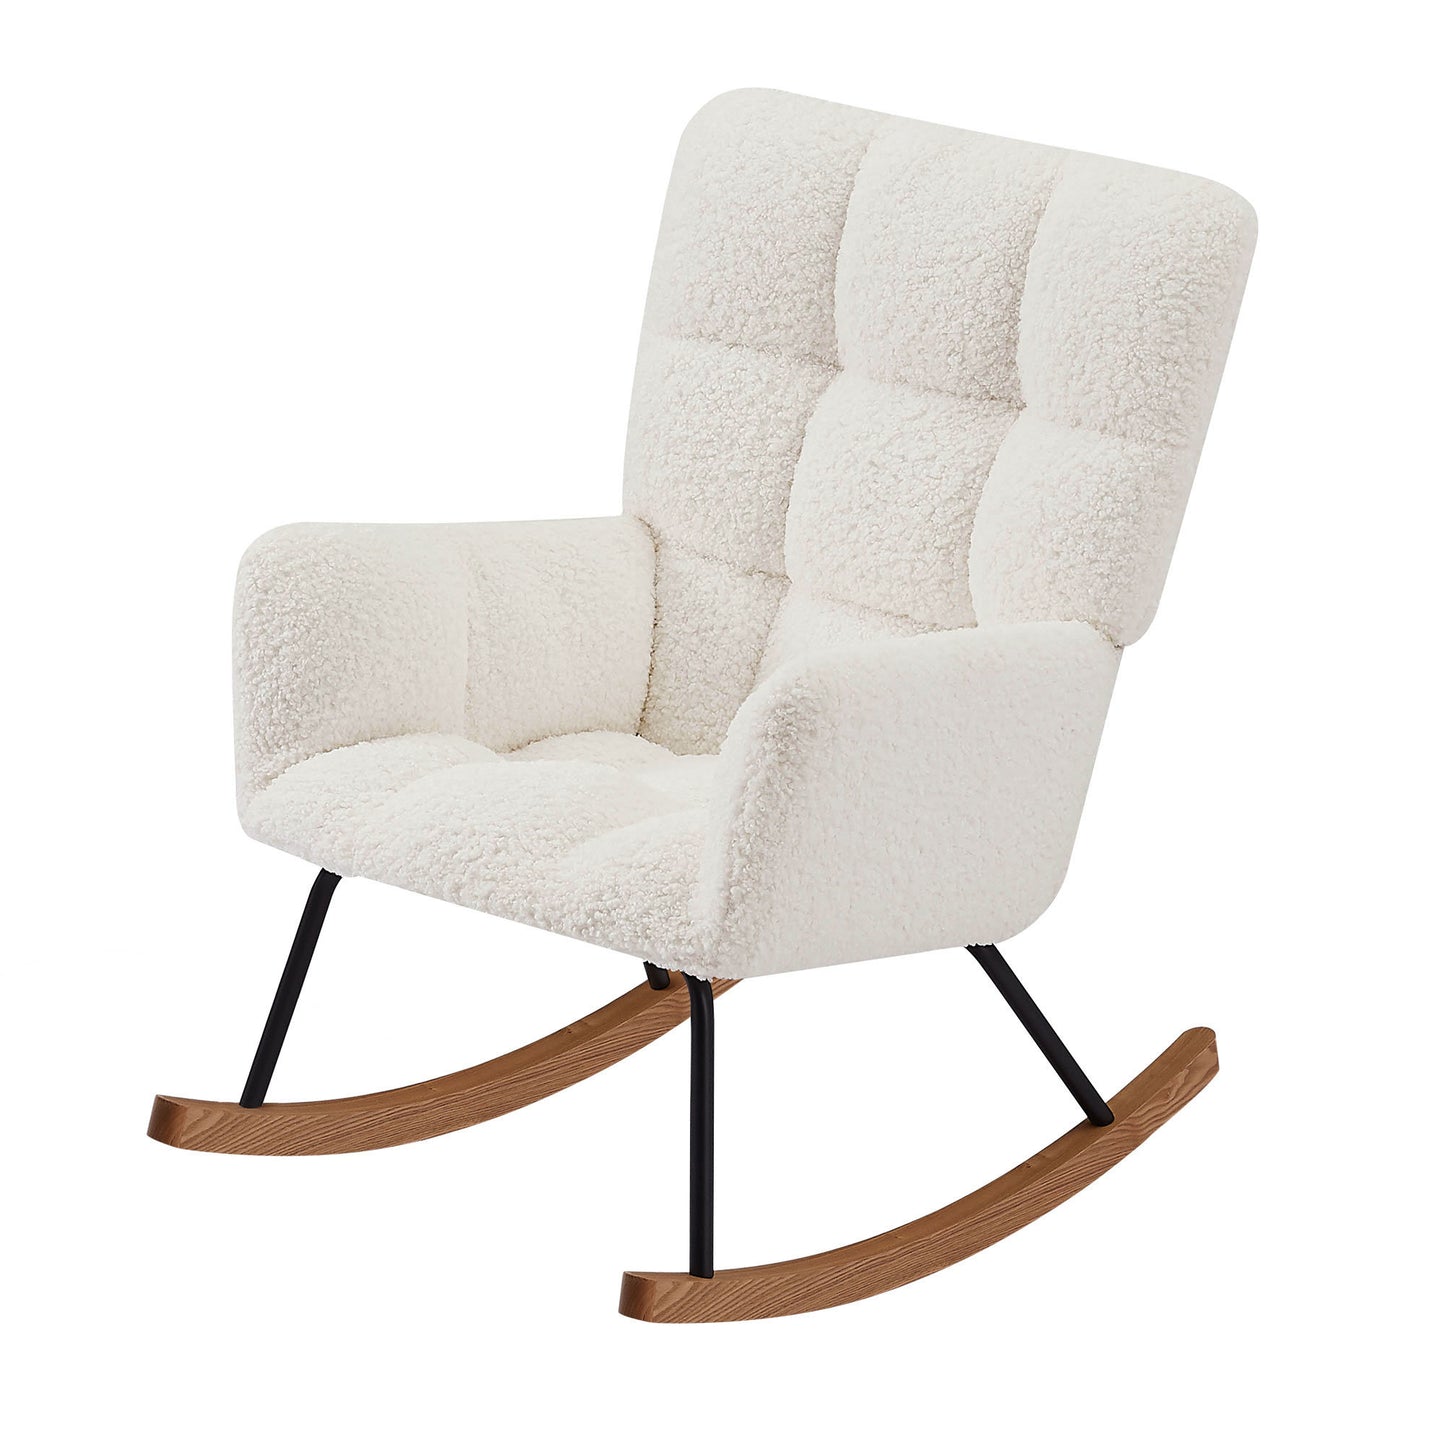 Comfy Upholstered Lounge Chair with High Backrest, for Nursing Baby, Reading, Napping